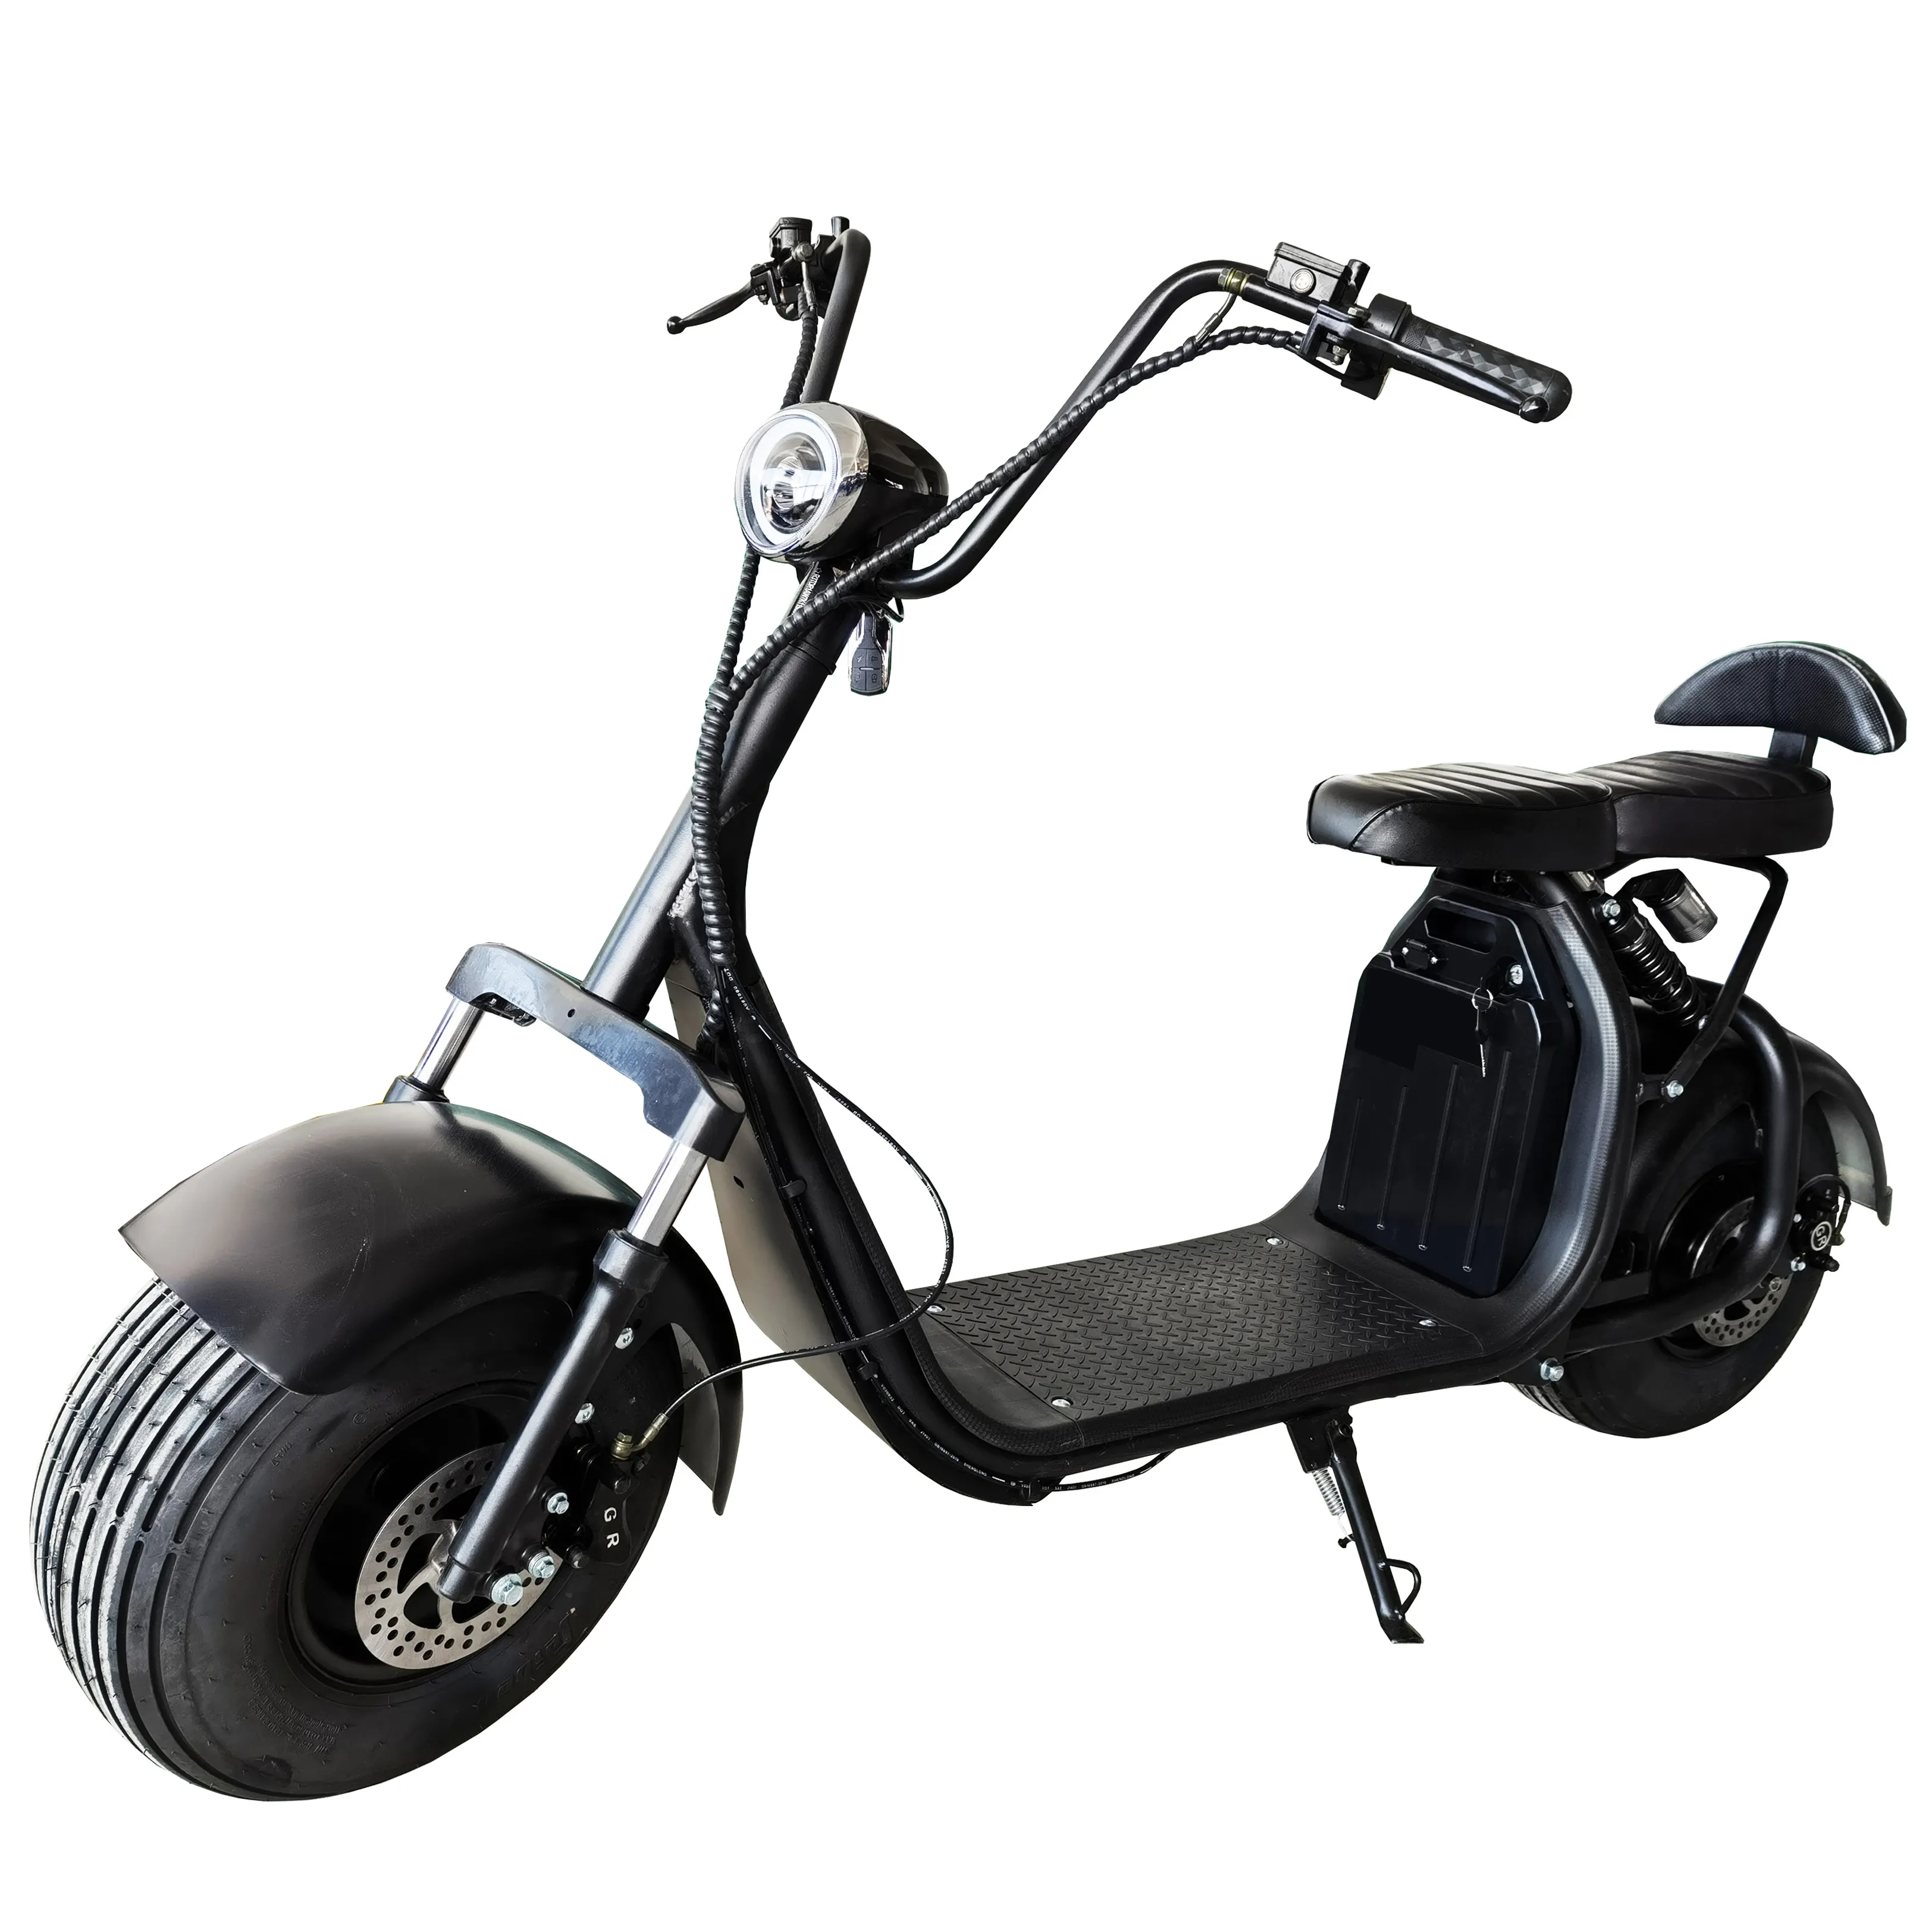 2 wheels electric scooter car/electric balance scooter/escooter 1500w